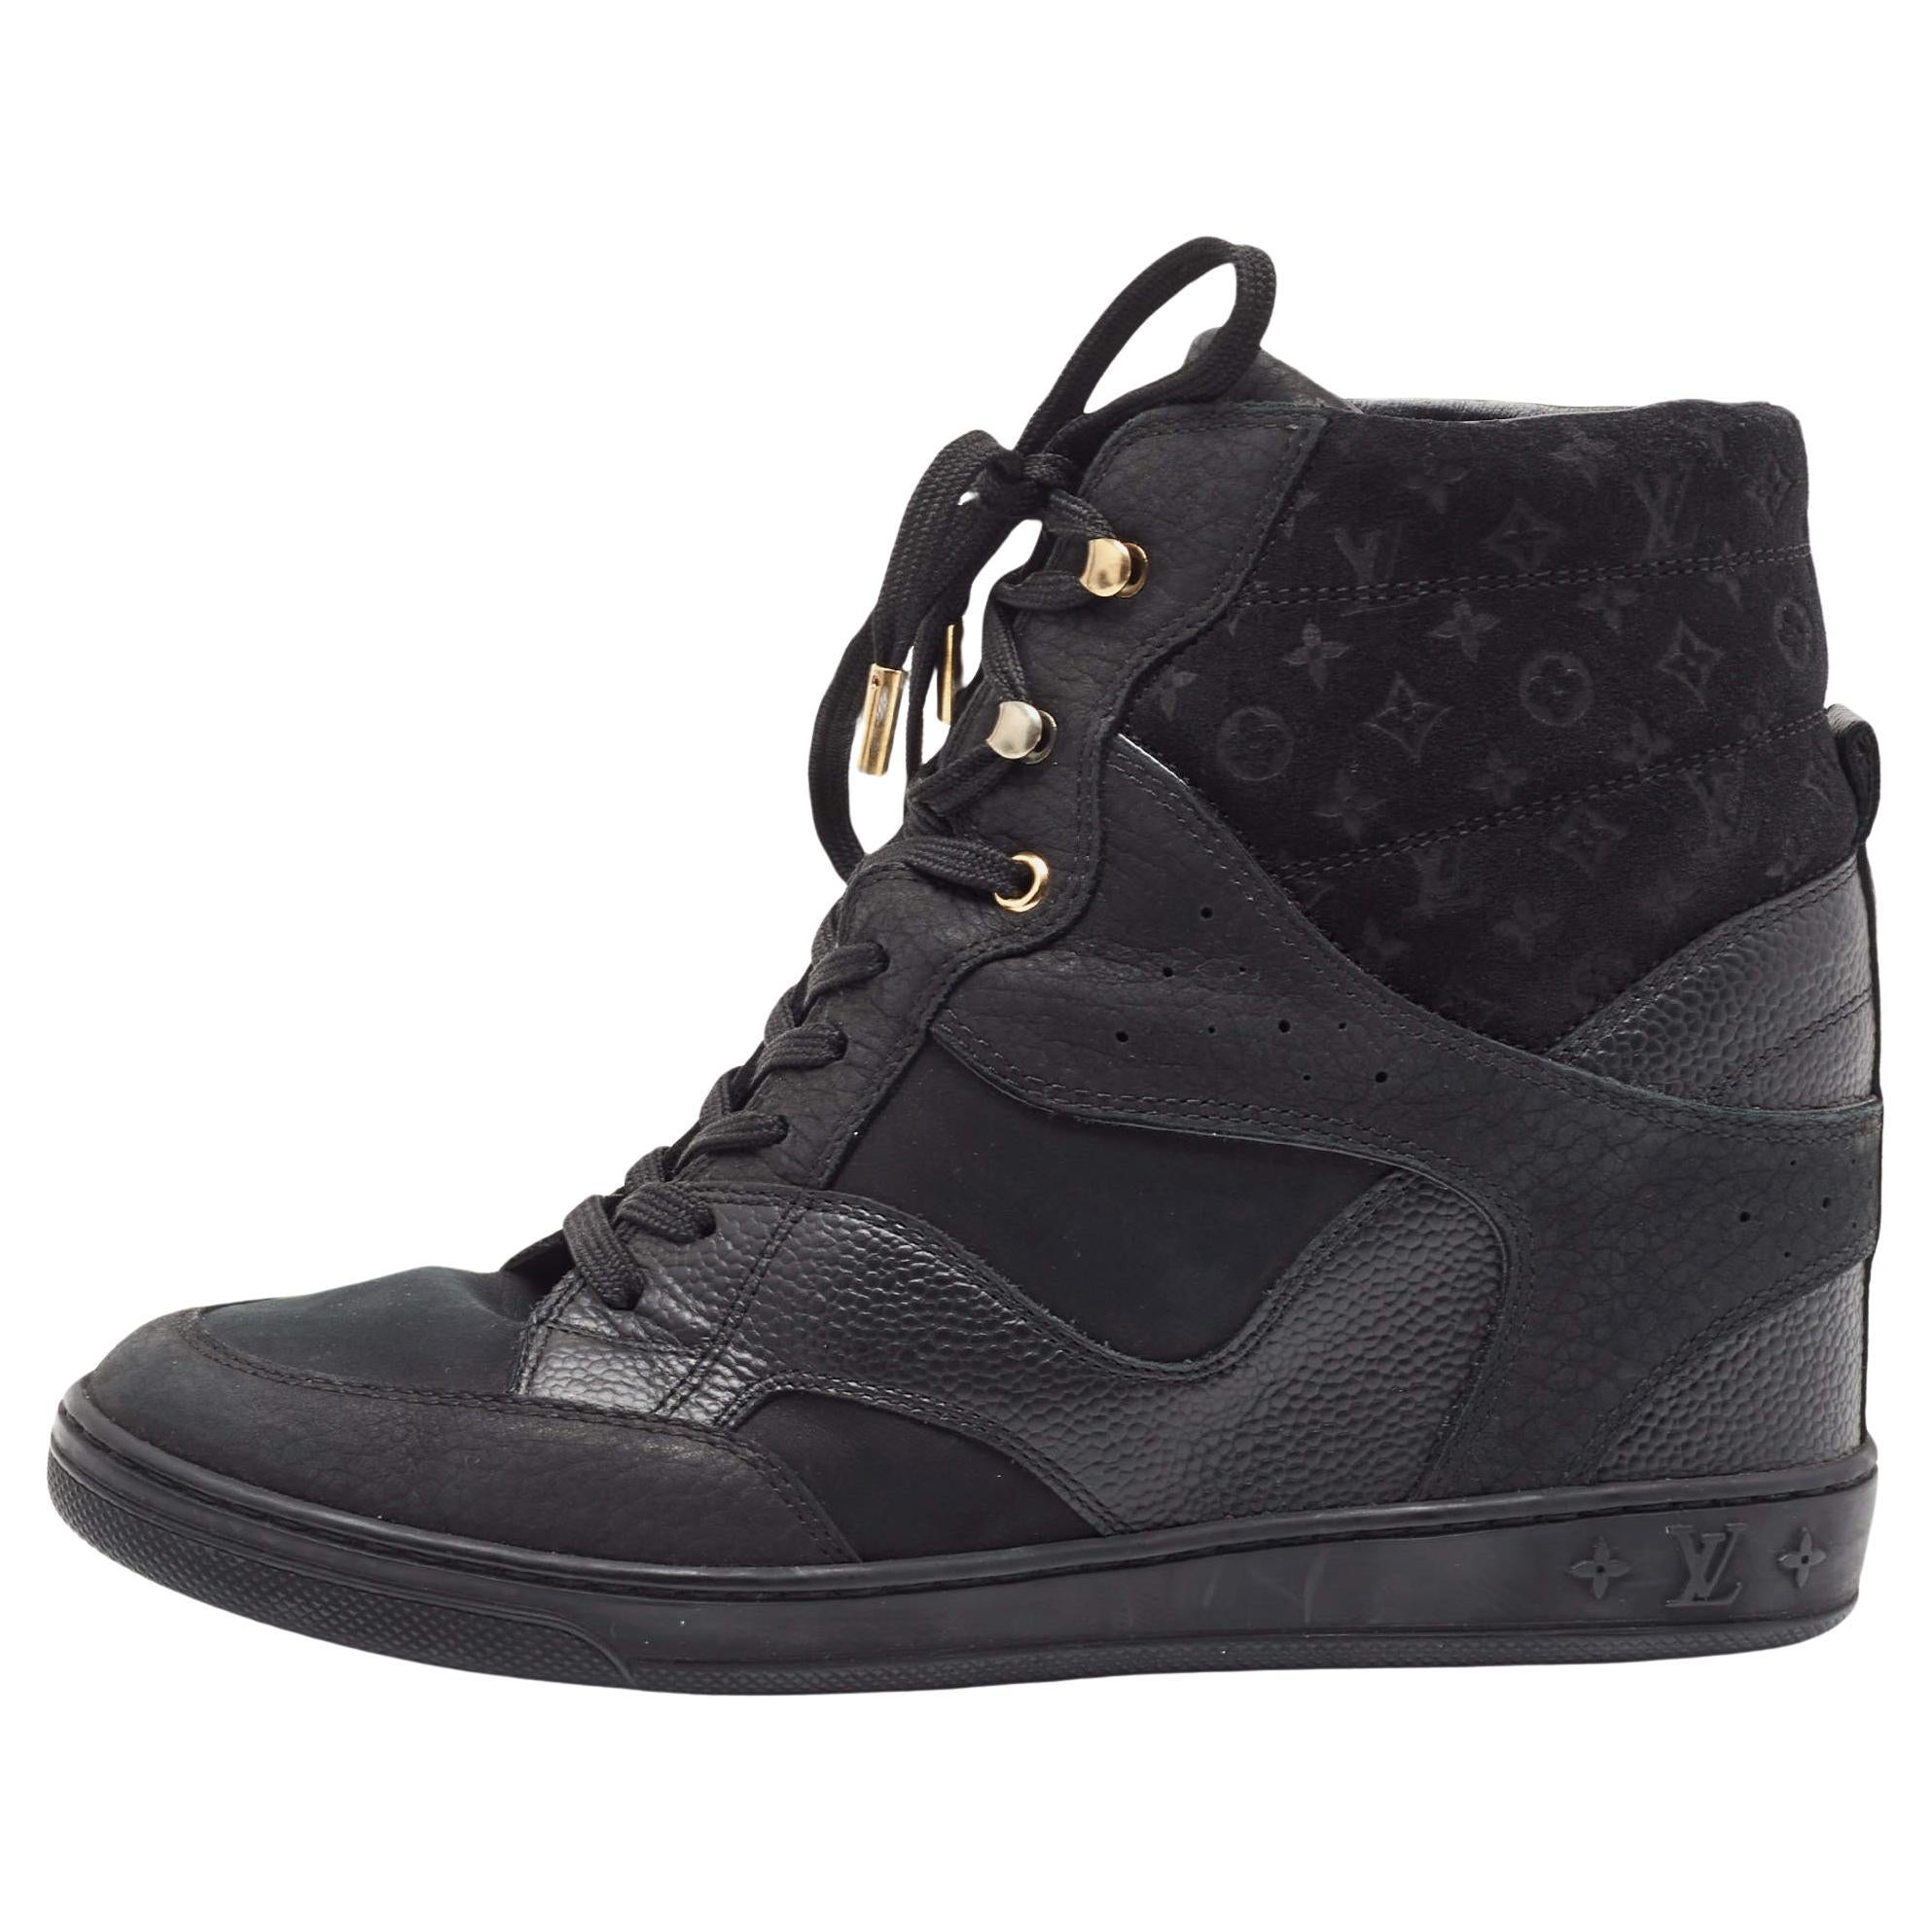 Louis Vuitton Black Nubuck Leather and Monogram Suede Cliff High Top Sneakers Si